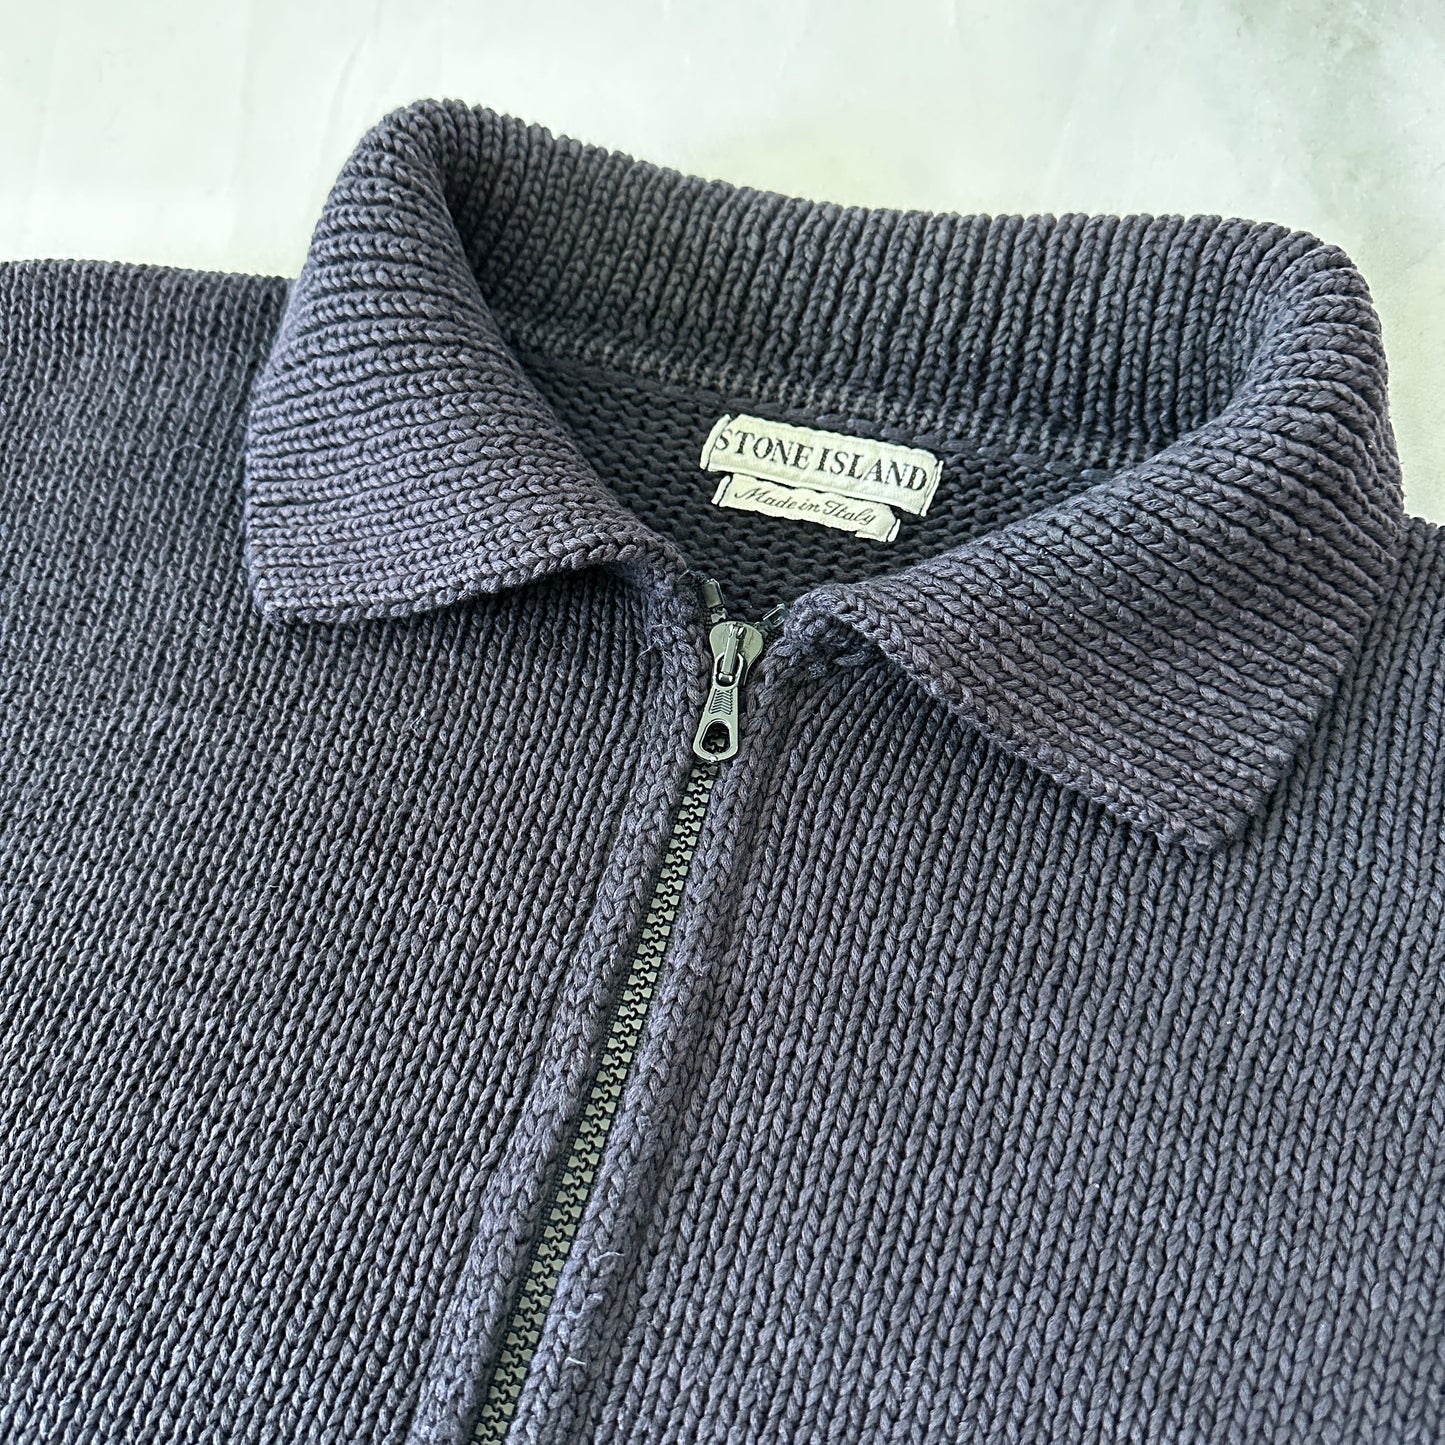 Stone Island 1995 Vintage Cotton Knit 3/4 Zip Sweater - L - Made in Italy